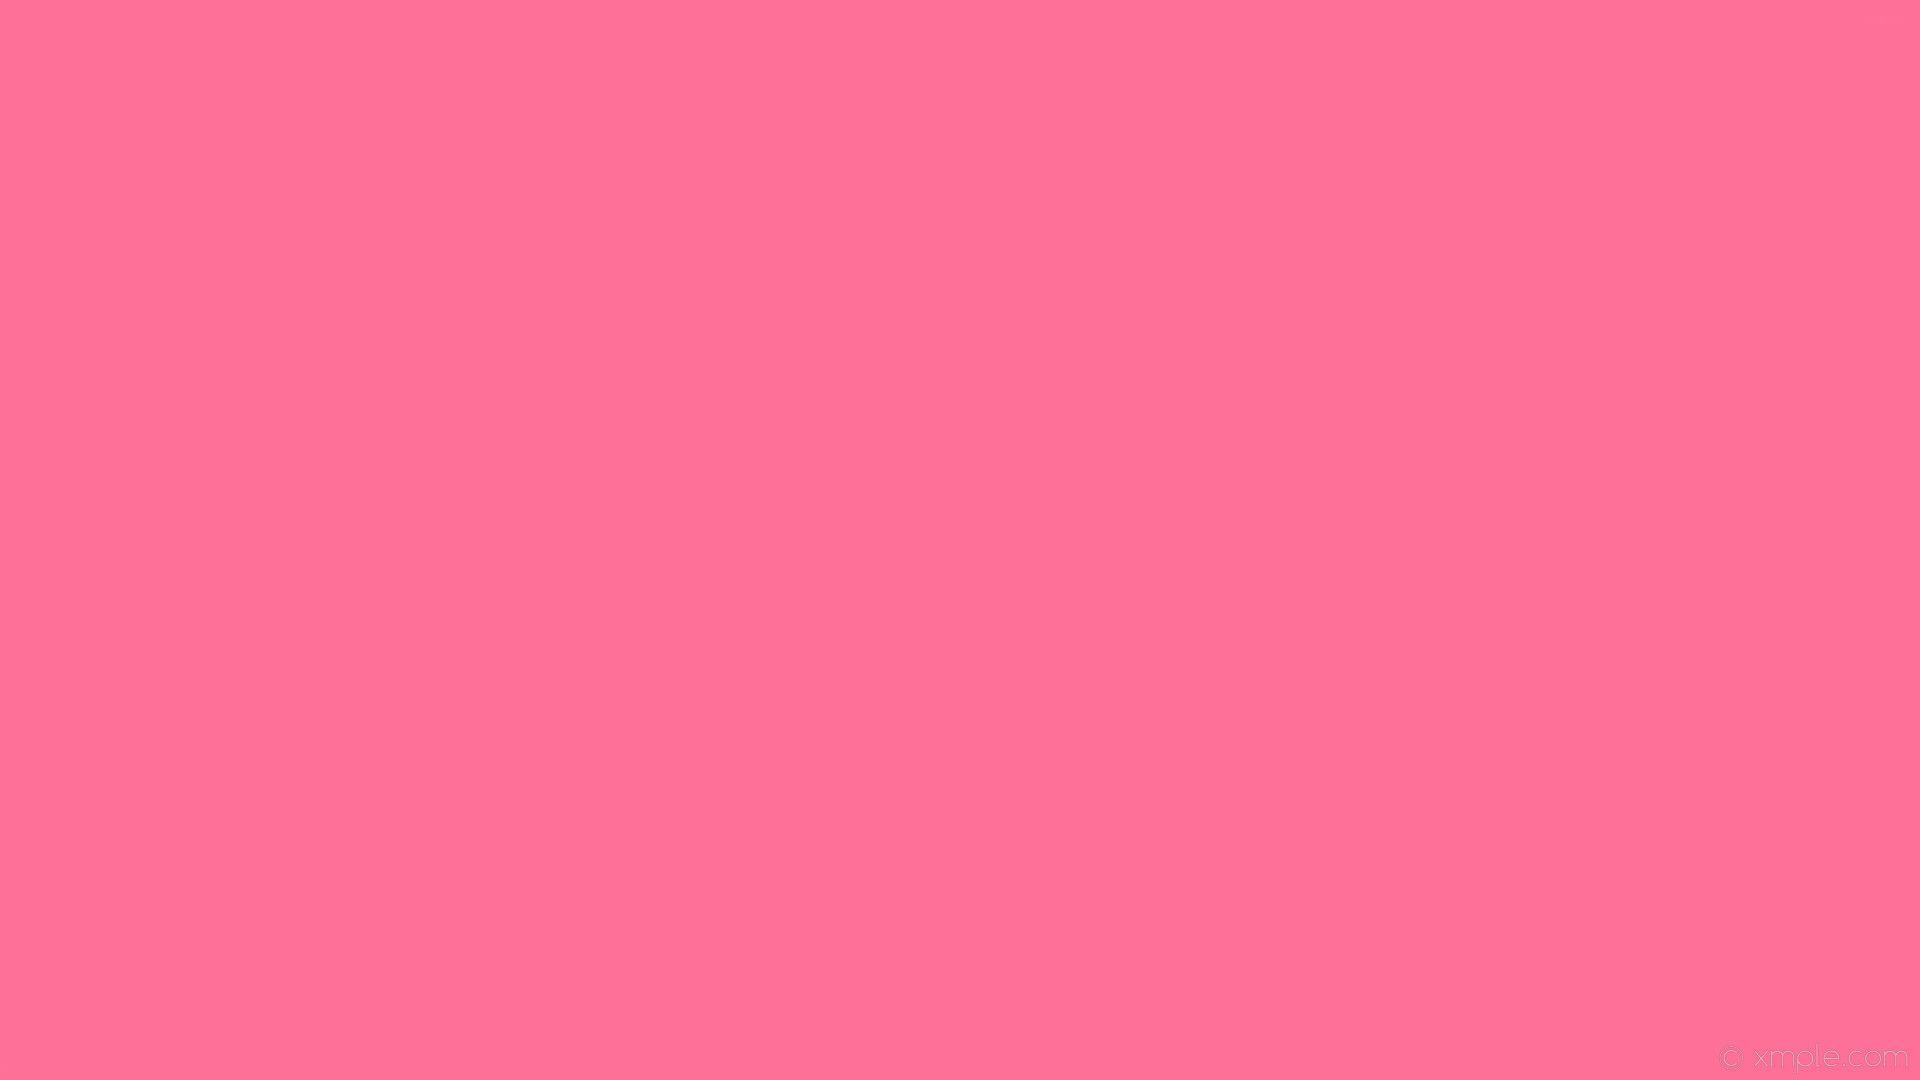 Free download Solid Pink Background 2560x1440 for your Desktop Mobile   Tablet  Explore 41 2560 x 1440 Tumblr Wallpaper  Wallpaper 2560 X 1440  2560 x 1440 Desktop Wallpaper 2560 X 1440 Wallpaper